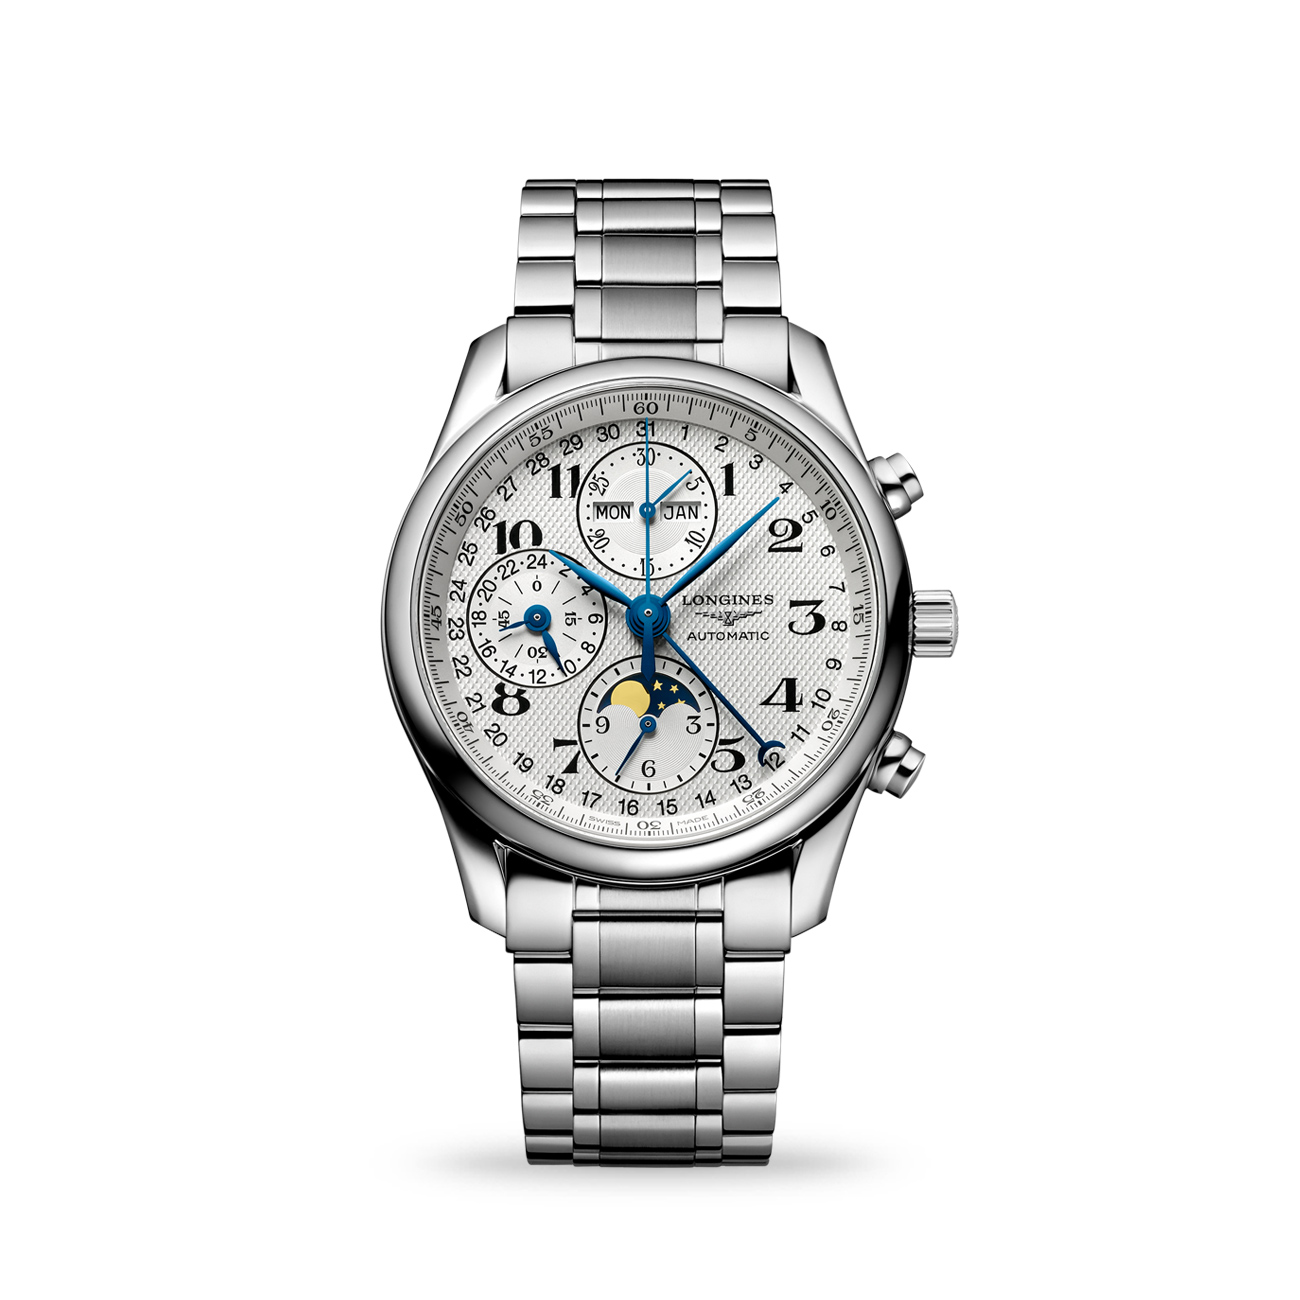 Longines Master Collection 40mm